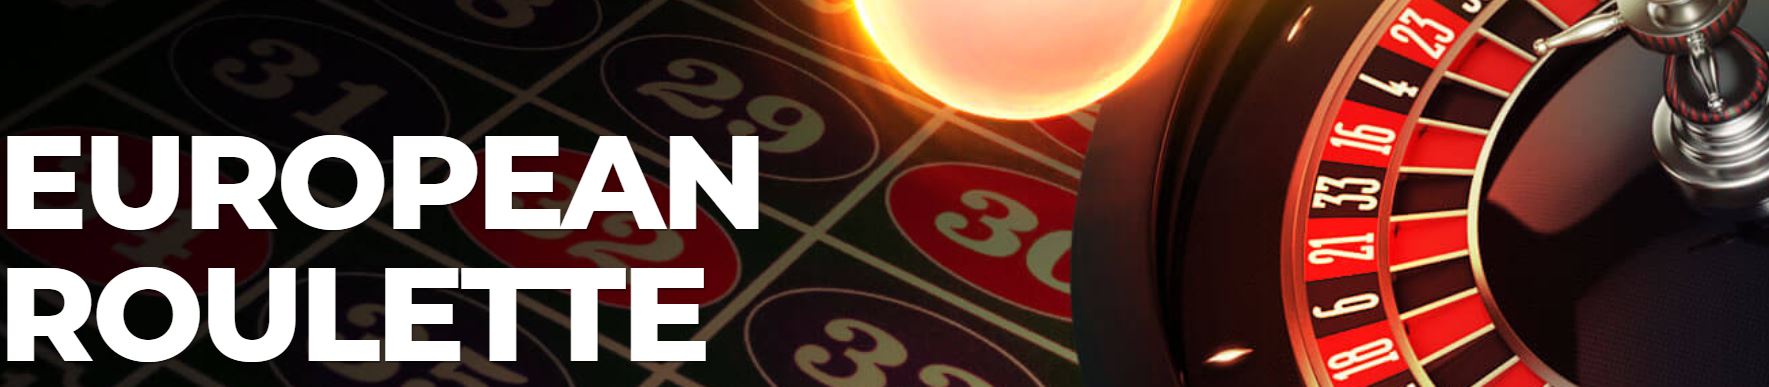 European roulette is available in most casinos.